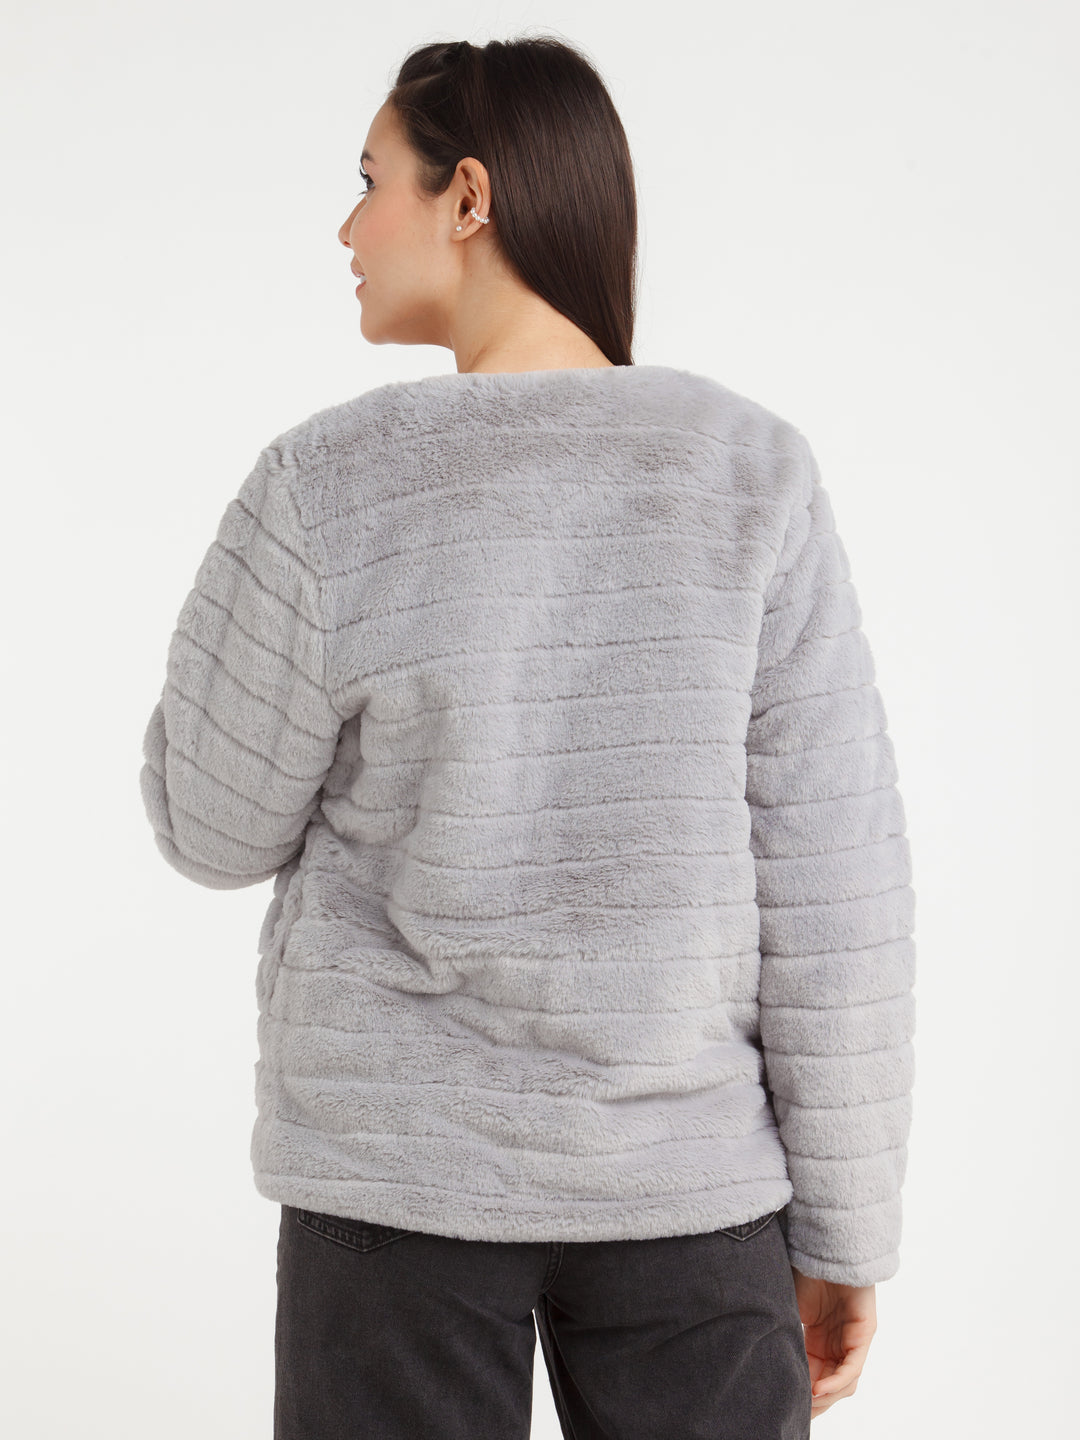 Grey Solid Jacket For Women